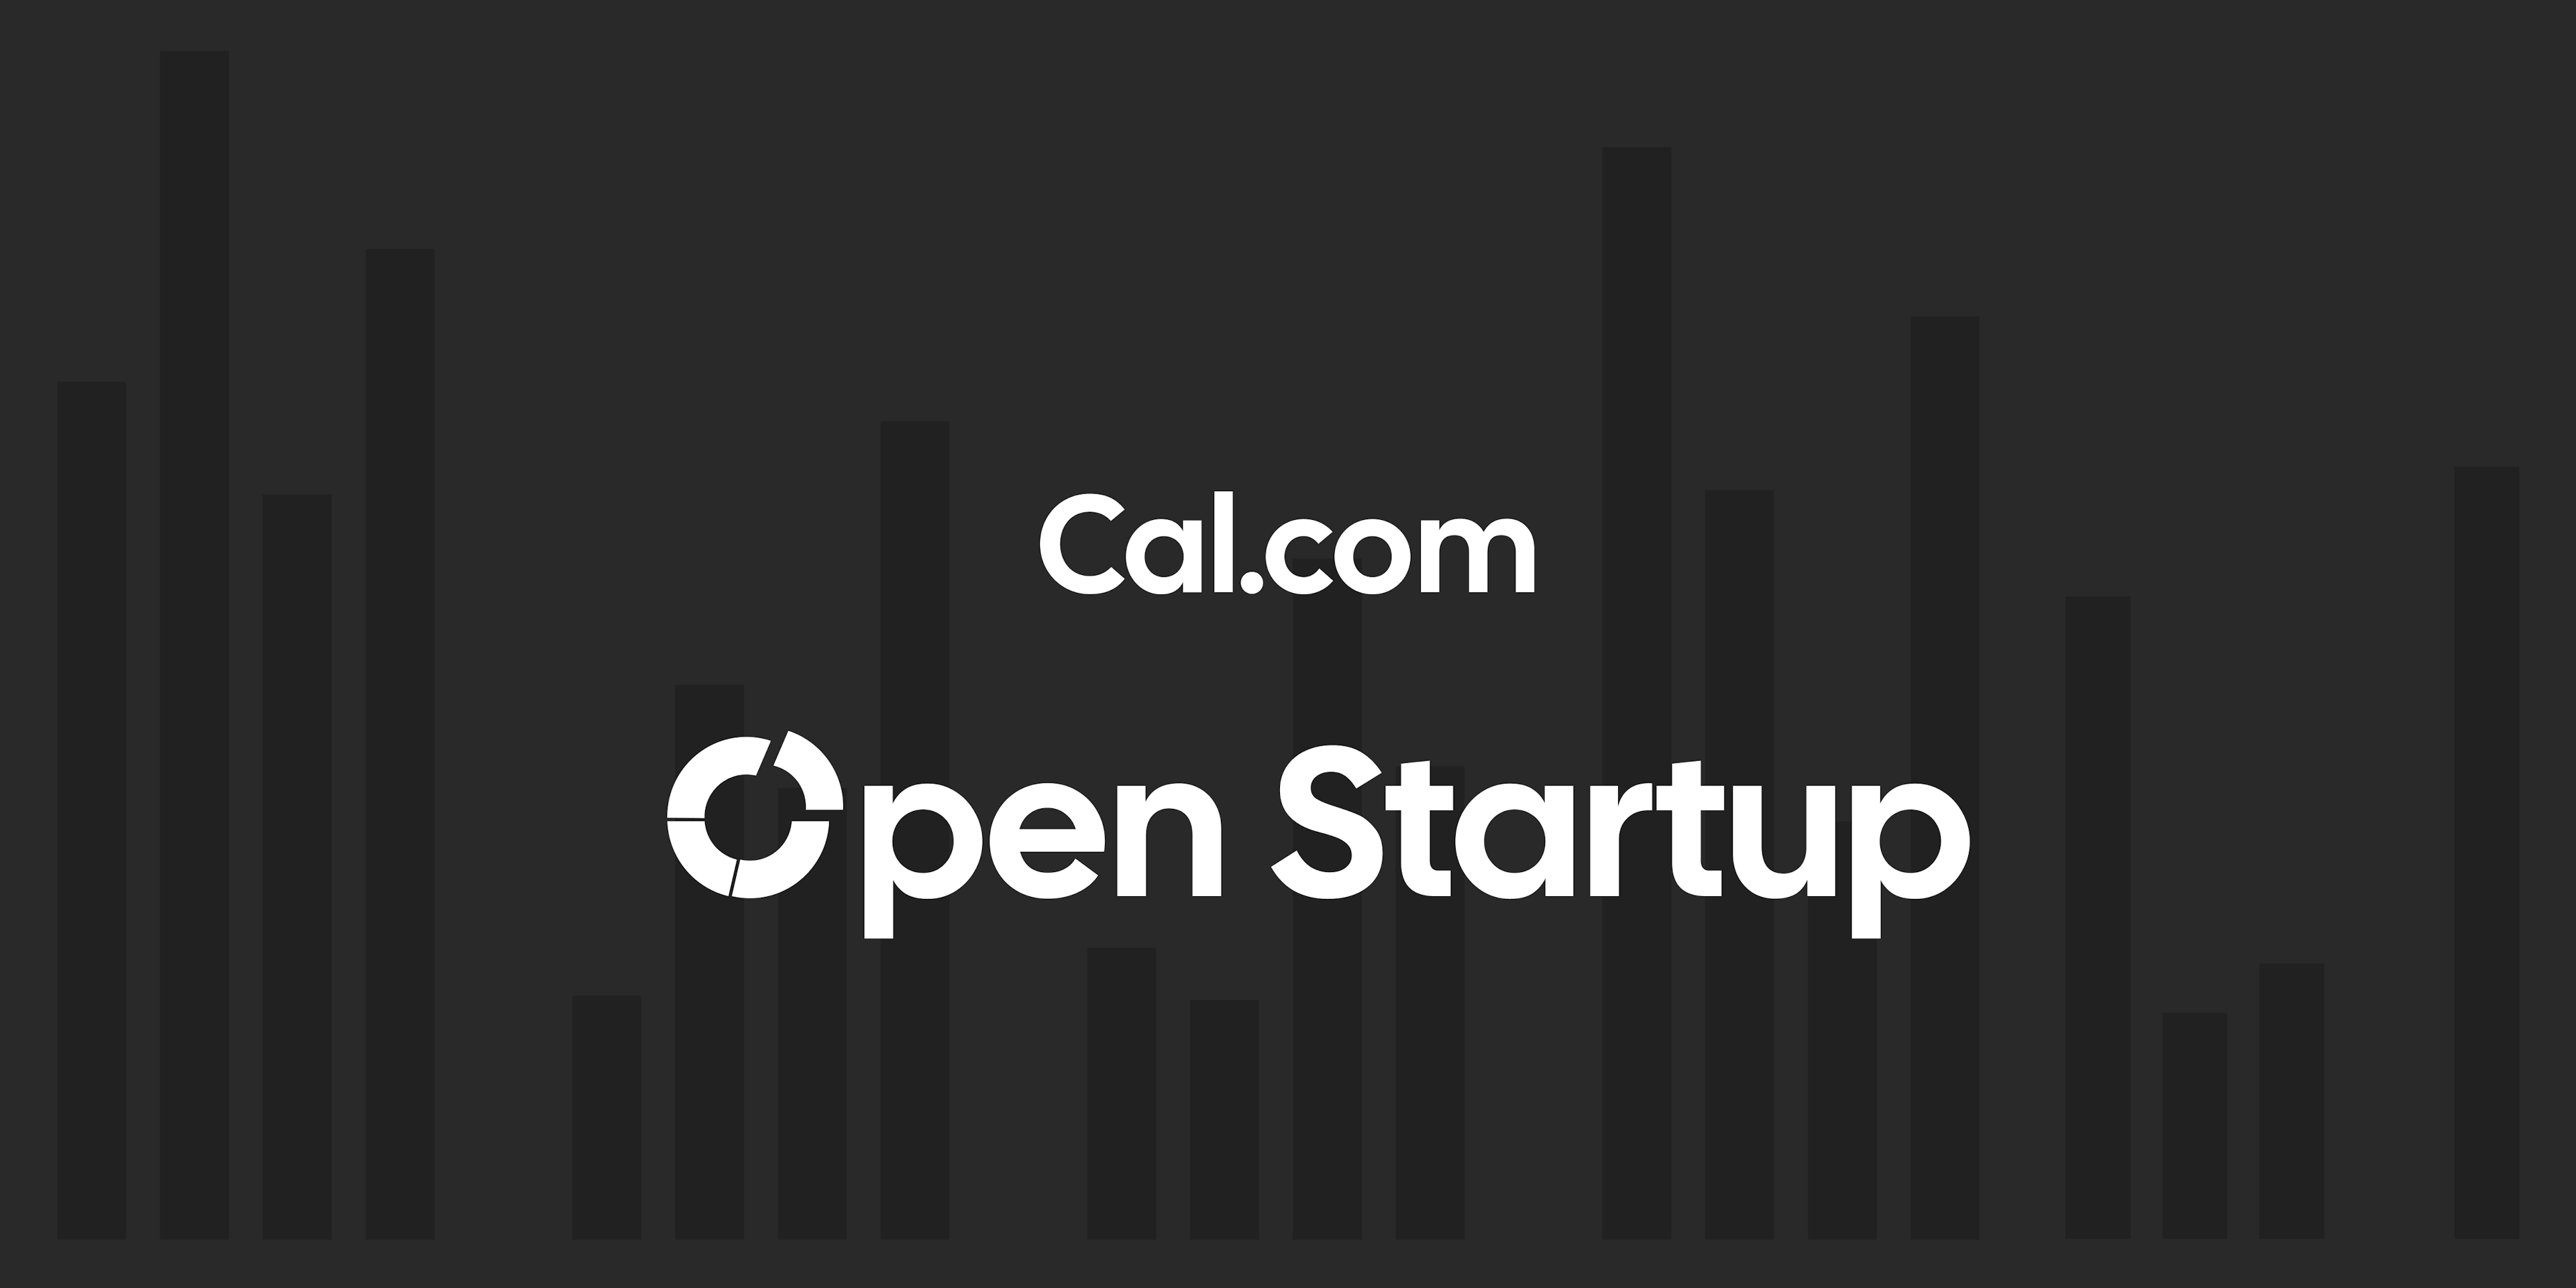 Why being an open startup matters